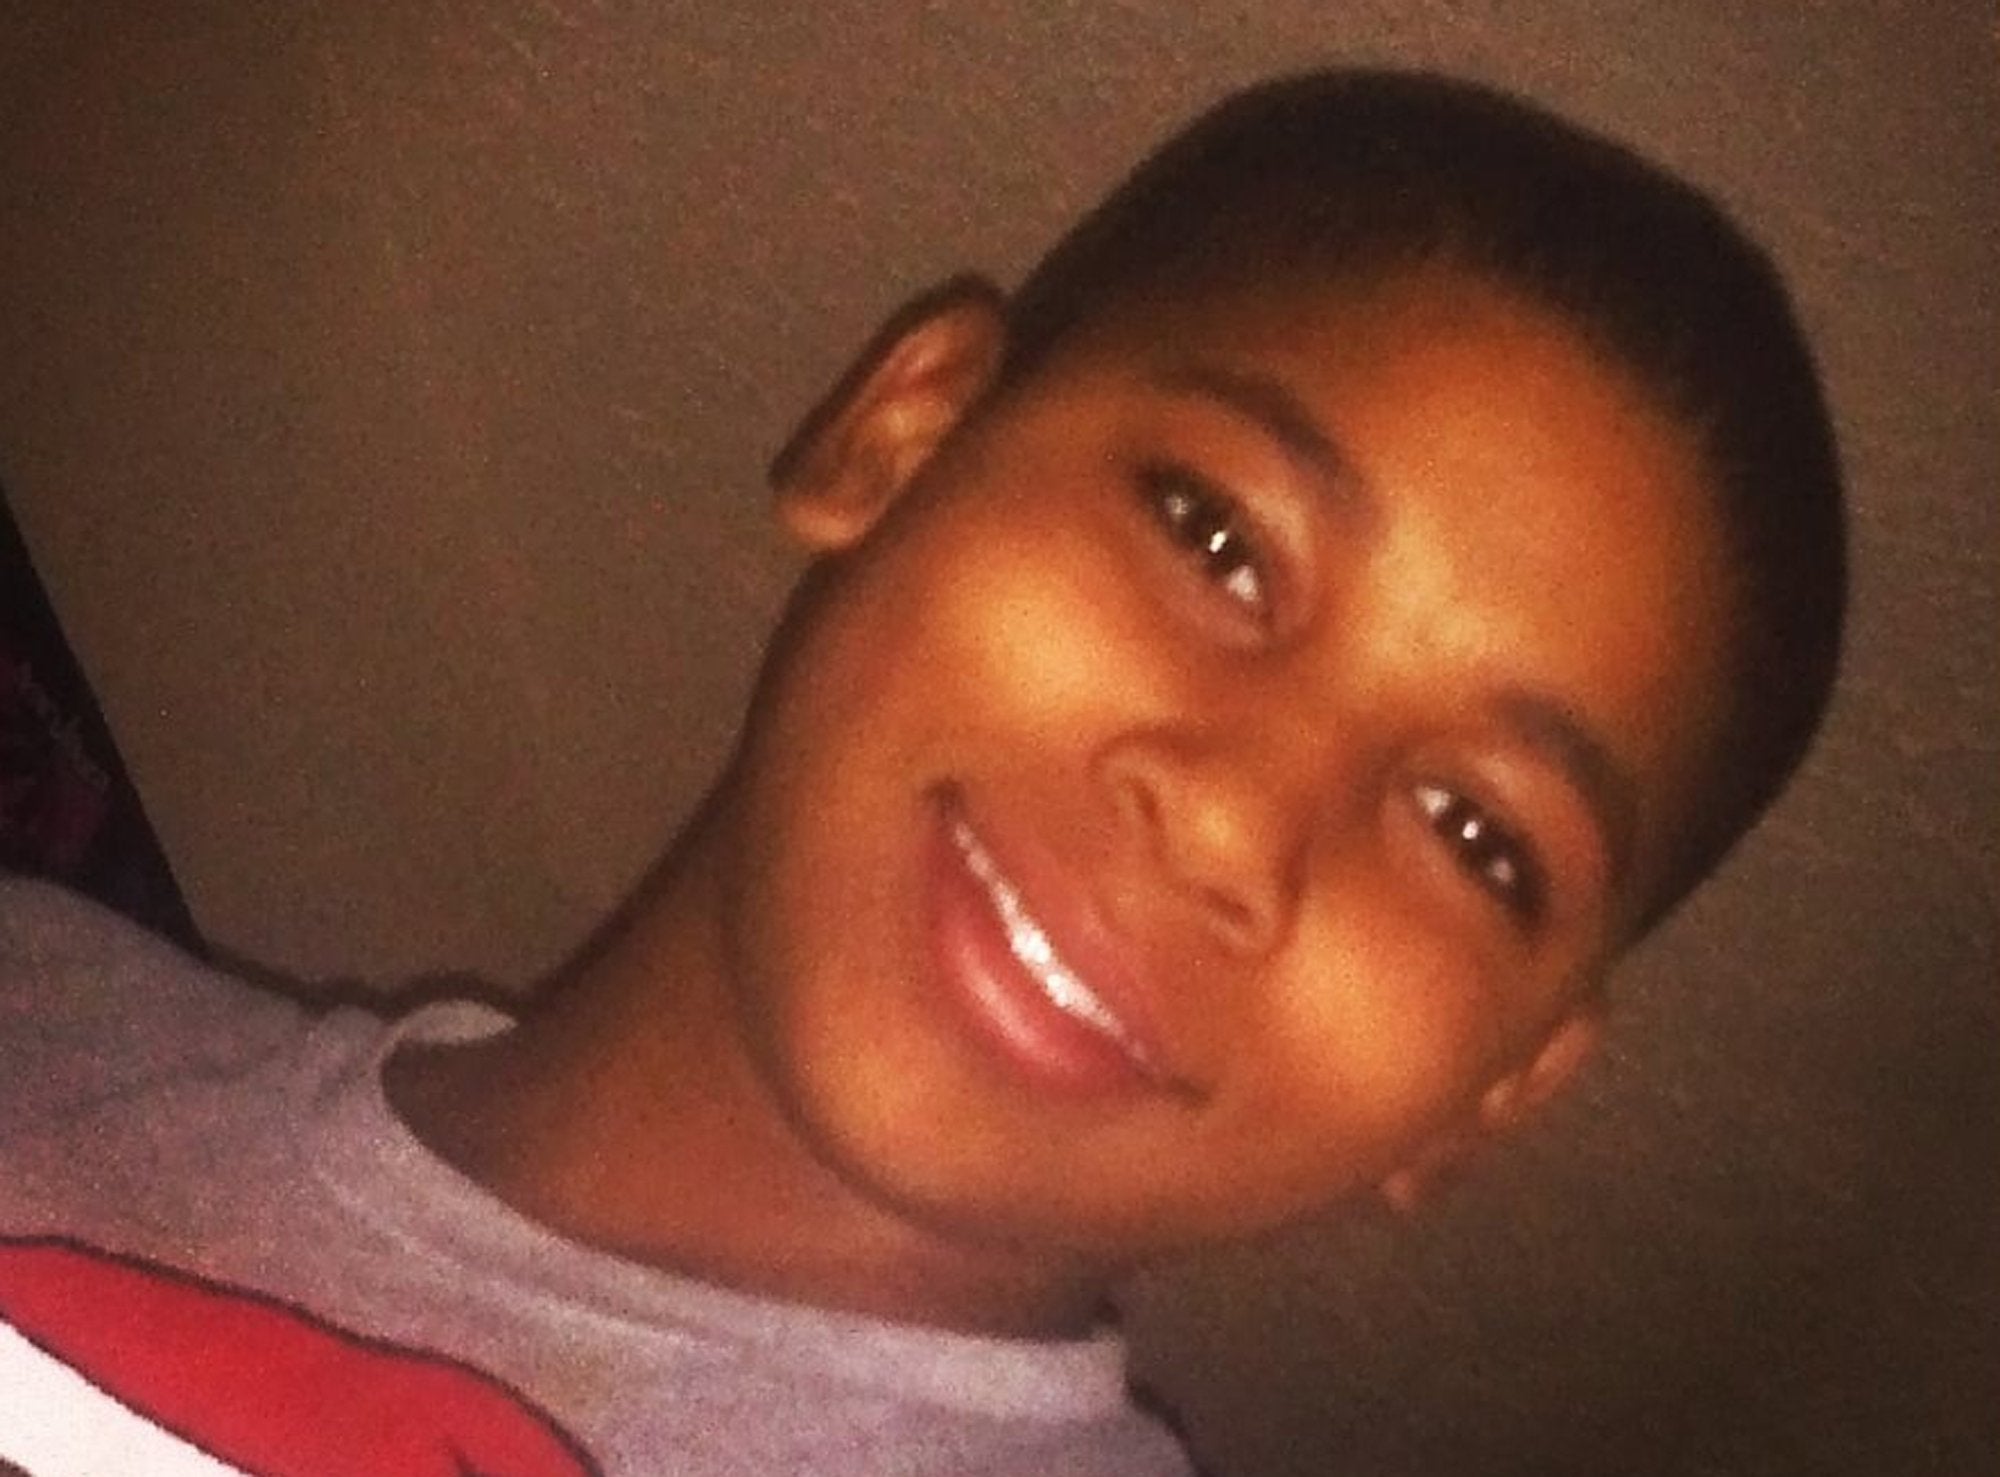 Police Officer In Tamir Rice Shooting: 'I Didn't Know It Was A Kid'
